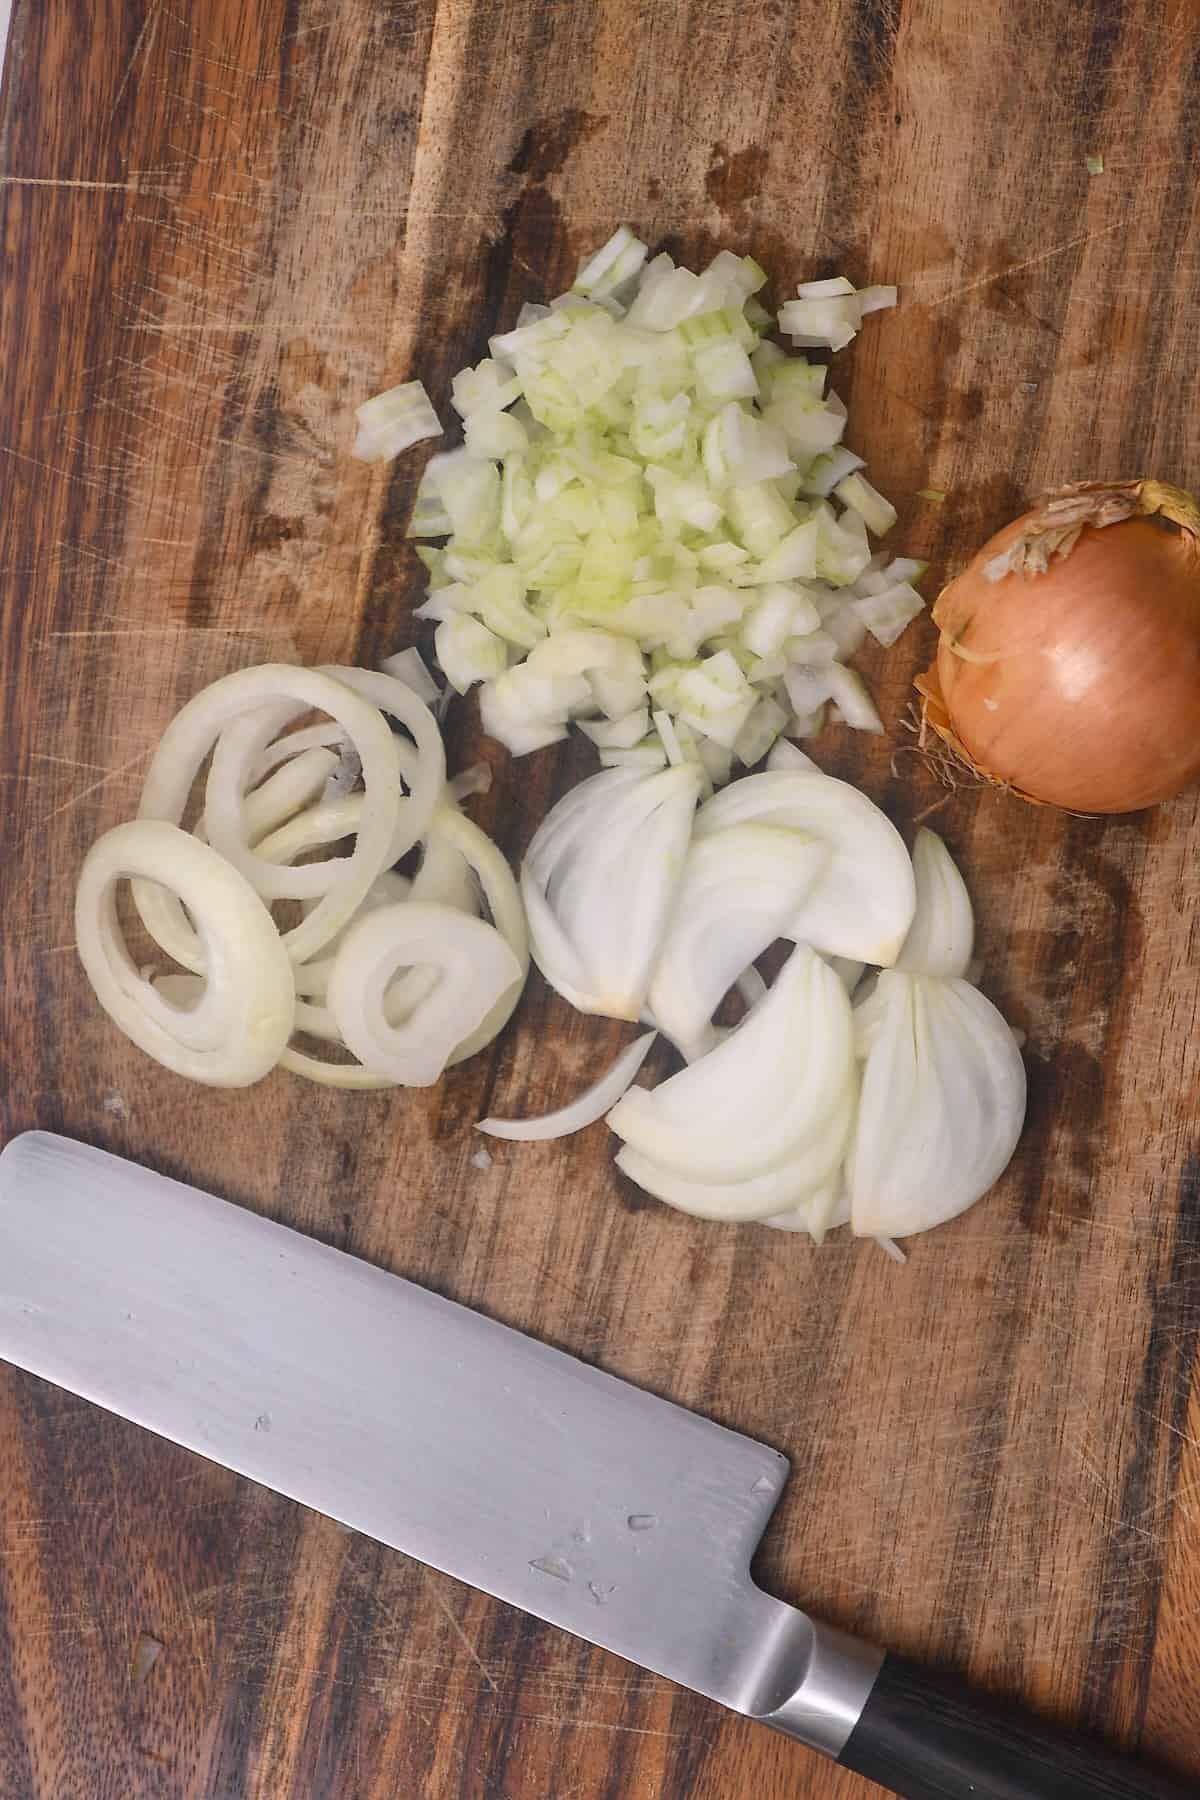 A knife and some chopped onions